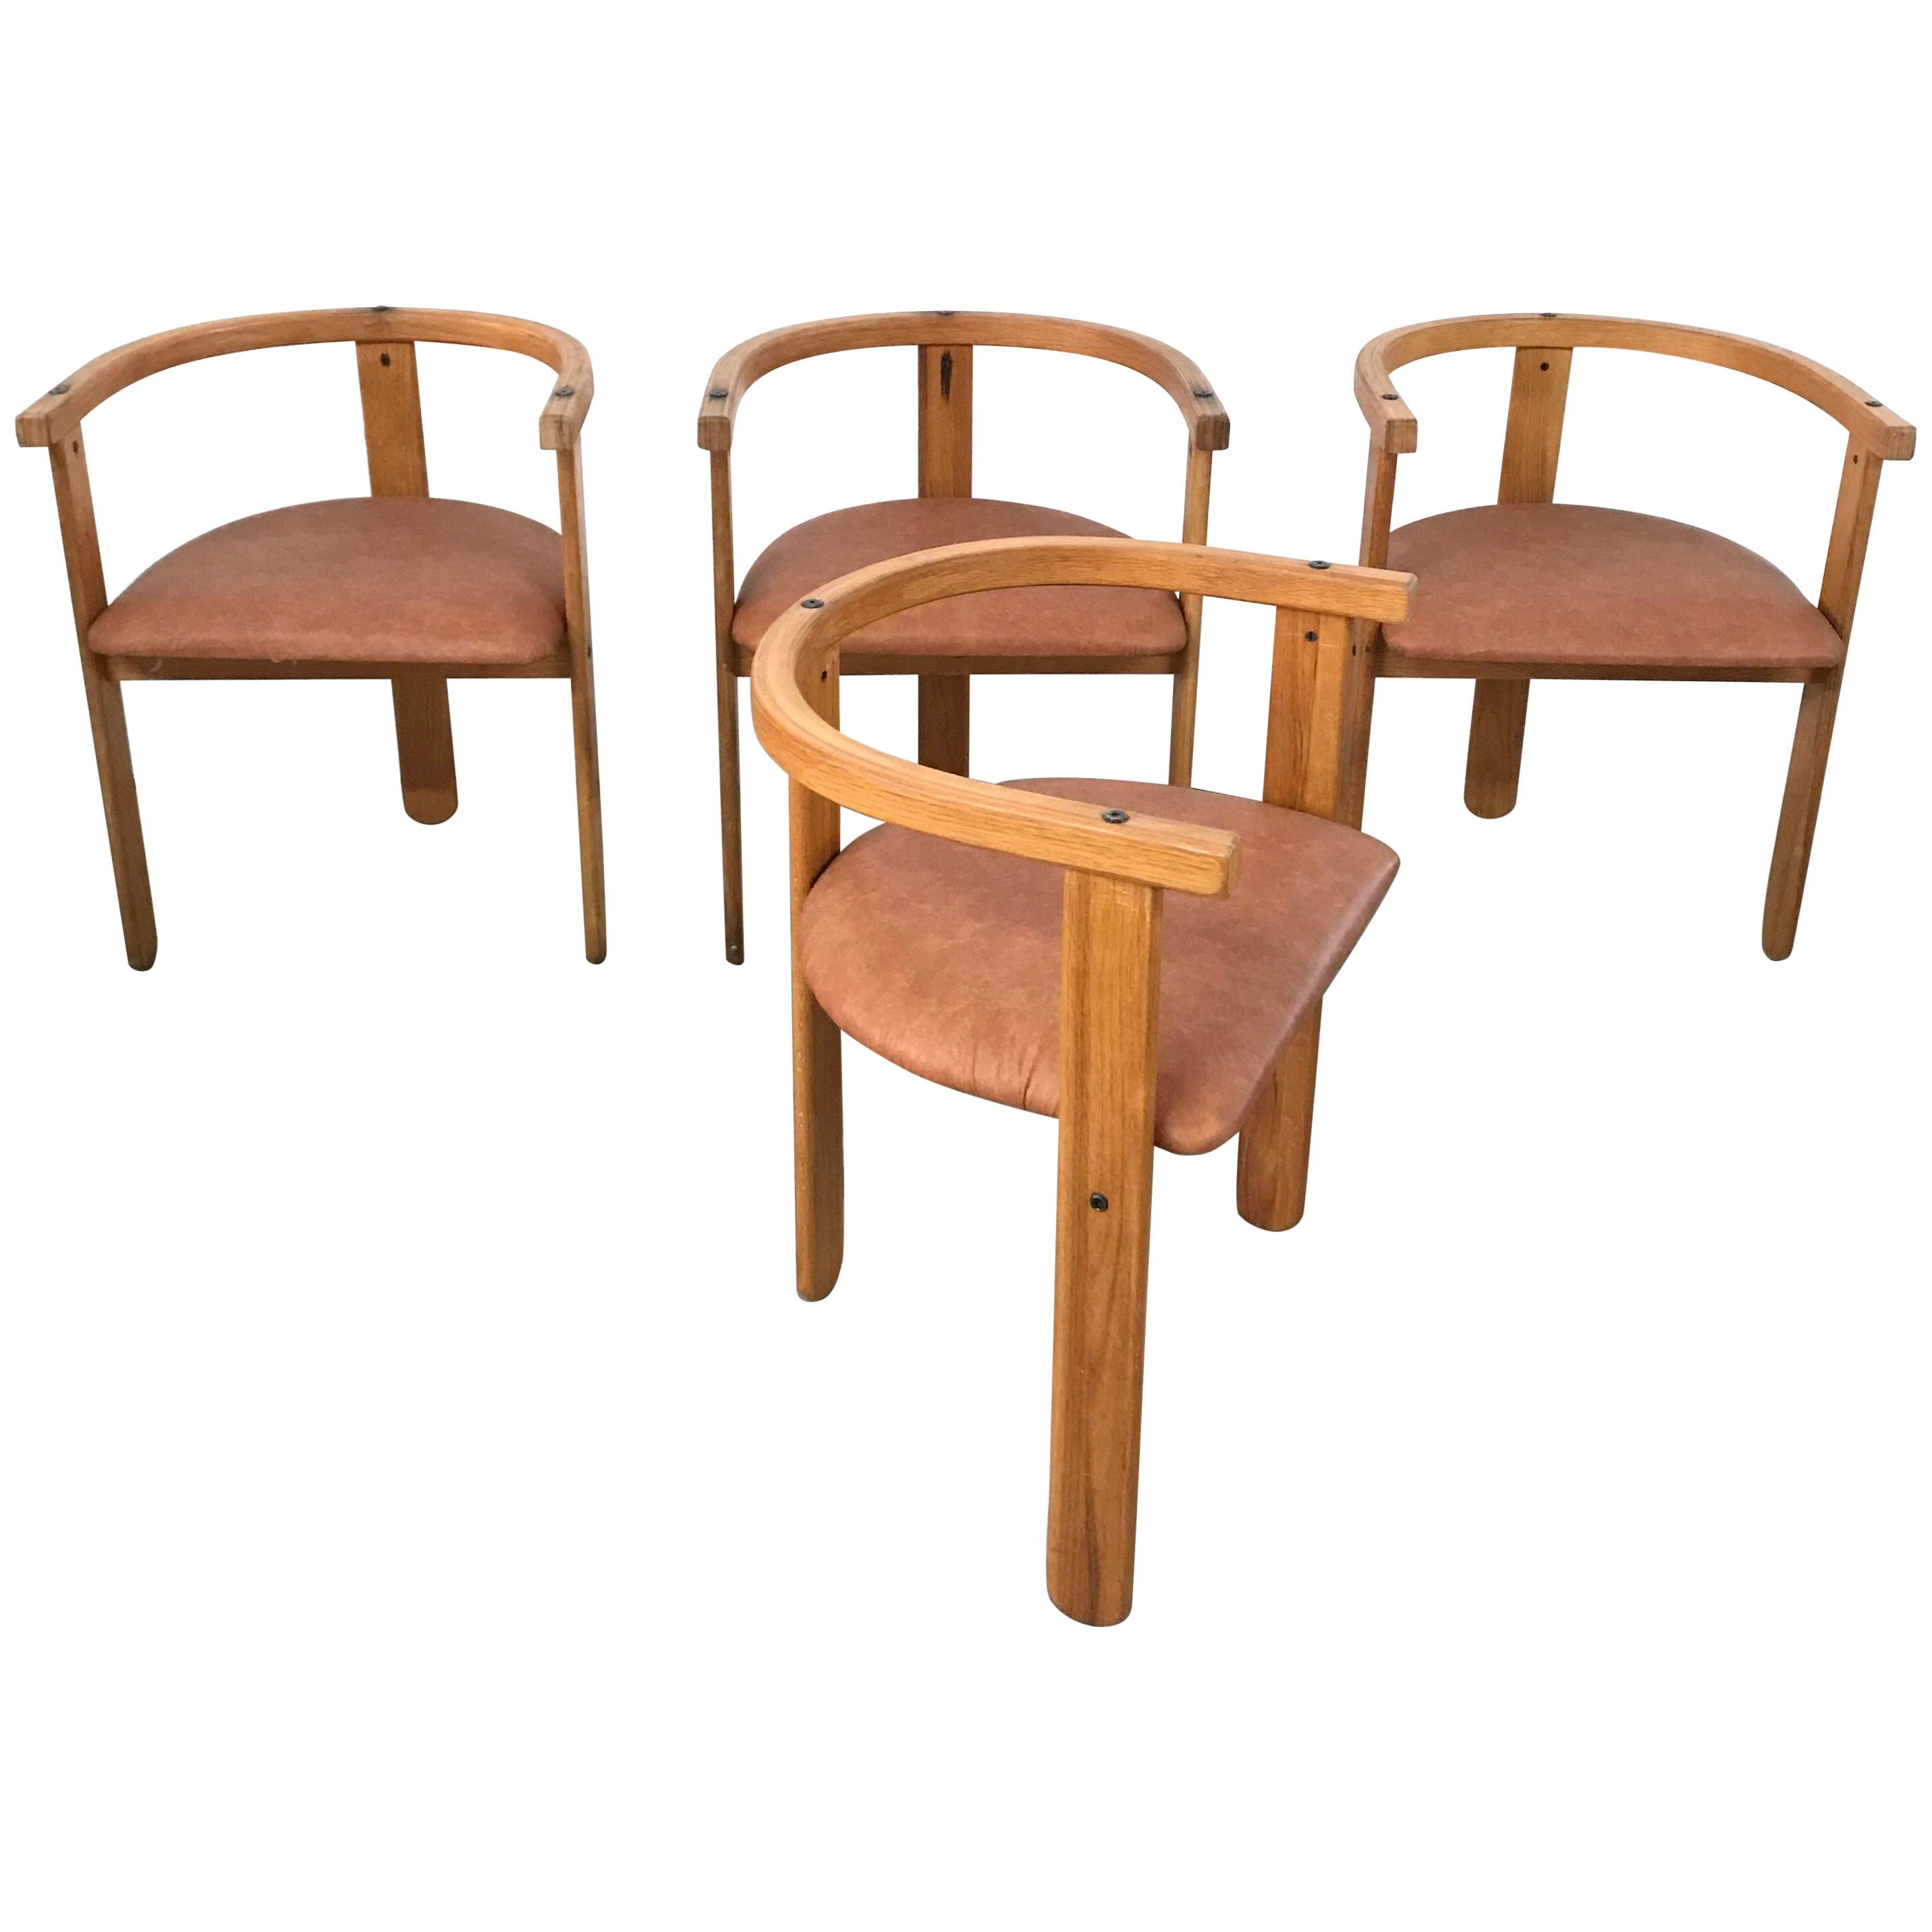 Set of Four Oak Dining Chairs, Style of Carlo Scarpa, circa 1968